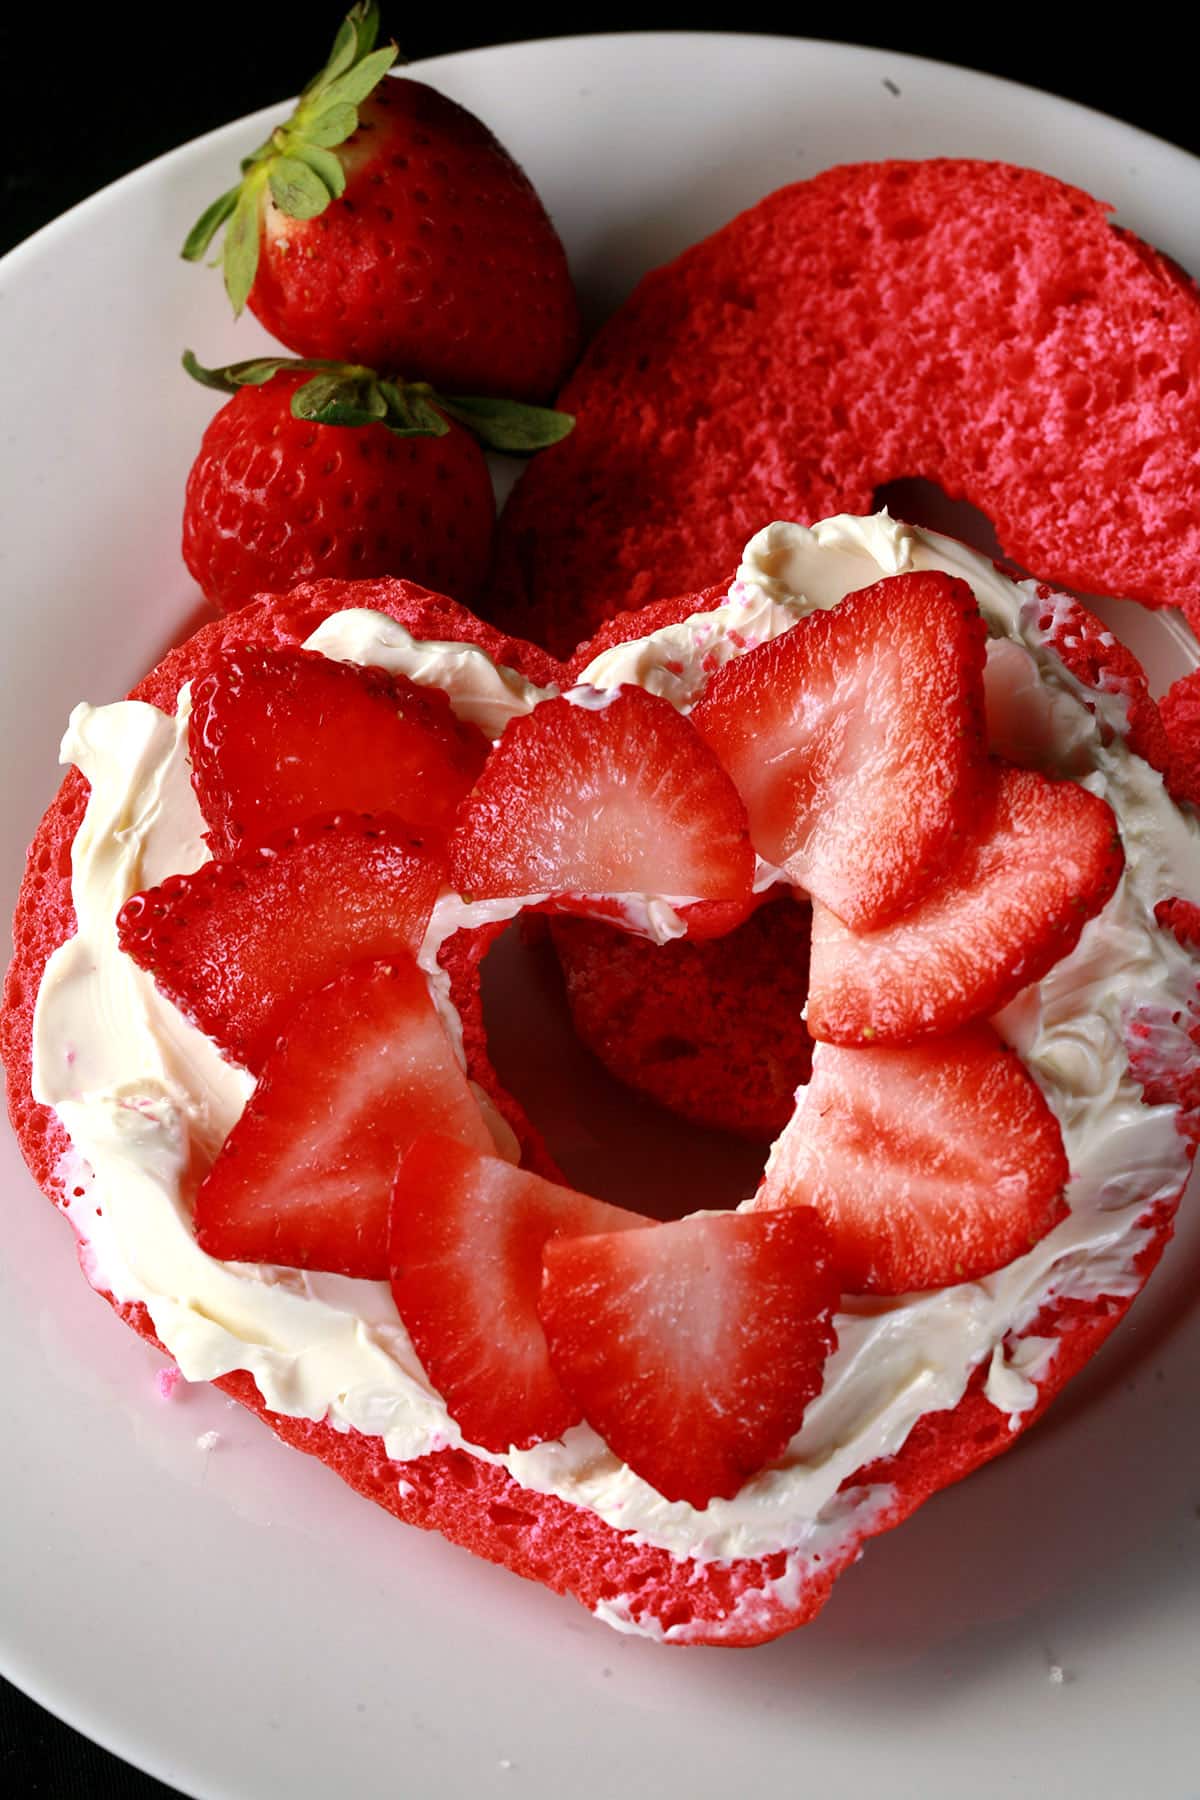 A sliced pink heart shaped bagel with cream cheese and sliced strawberries on it.